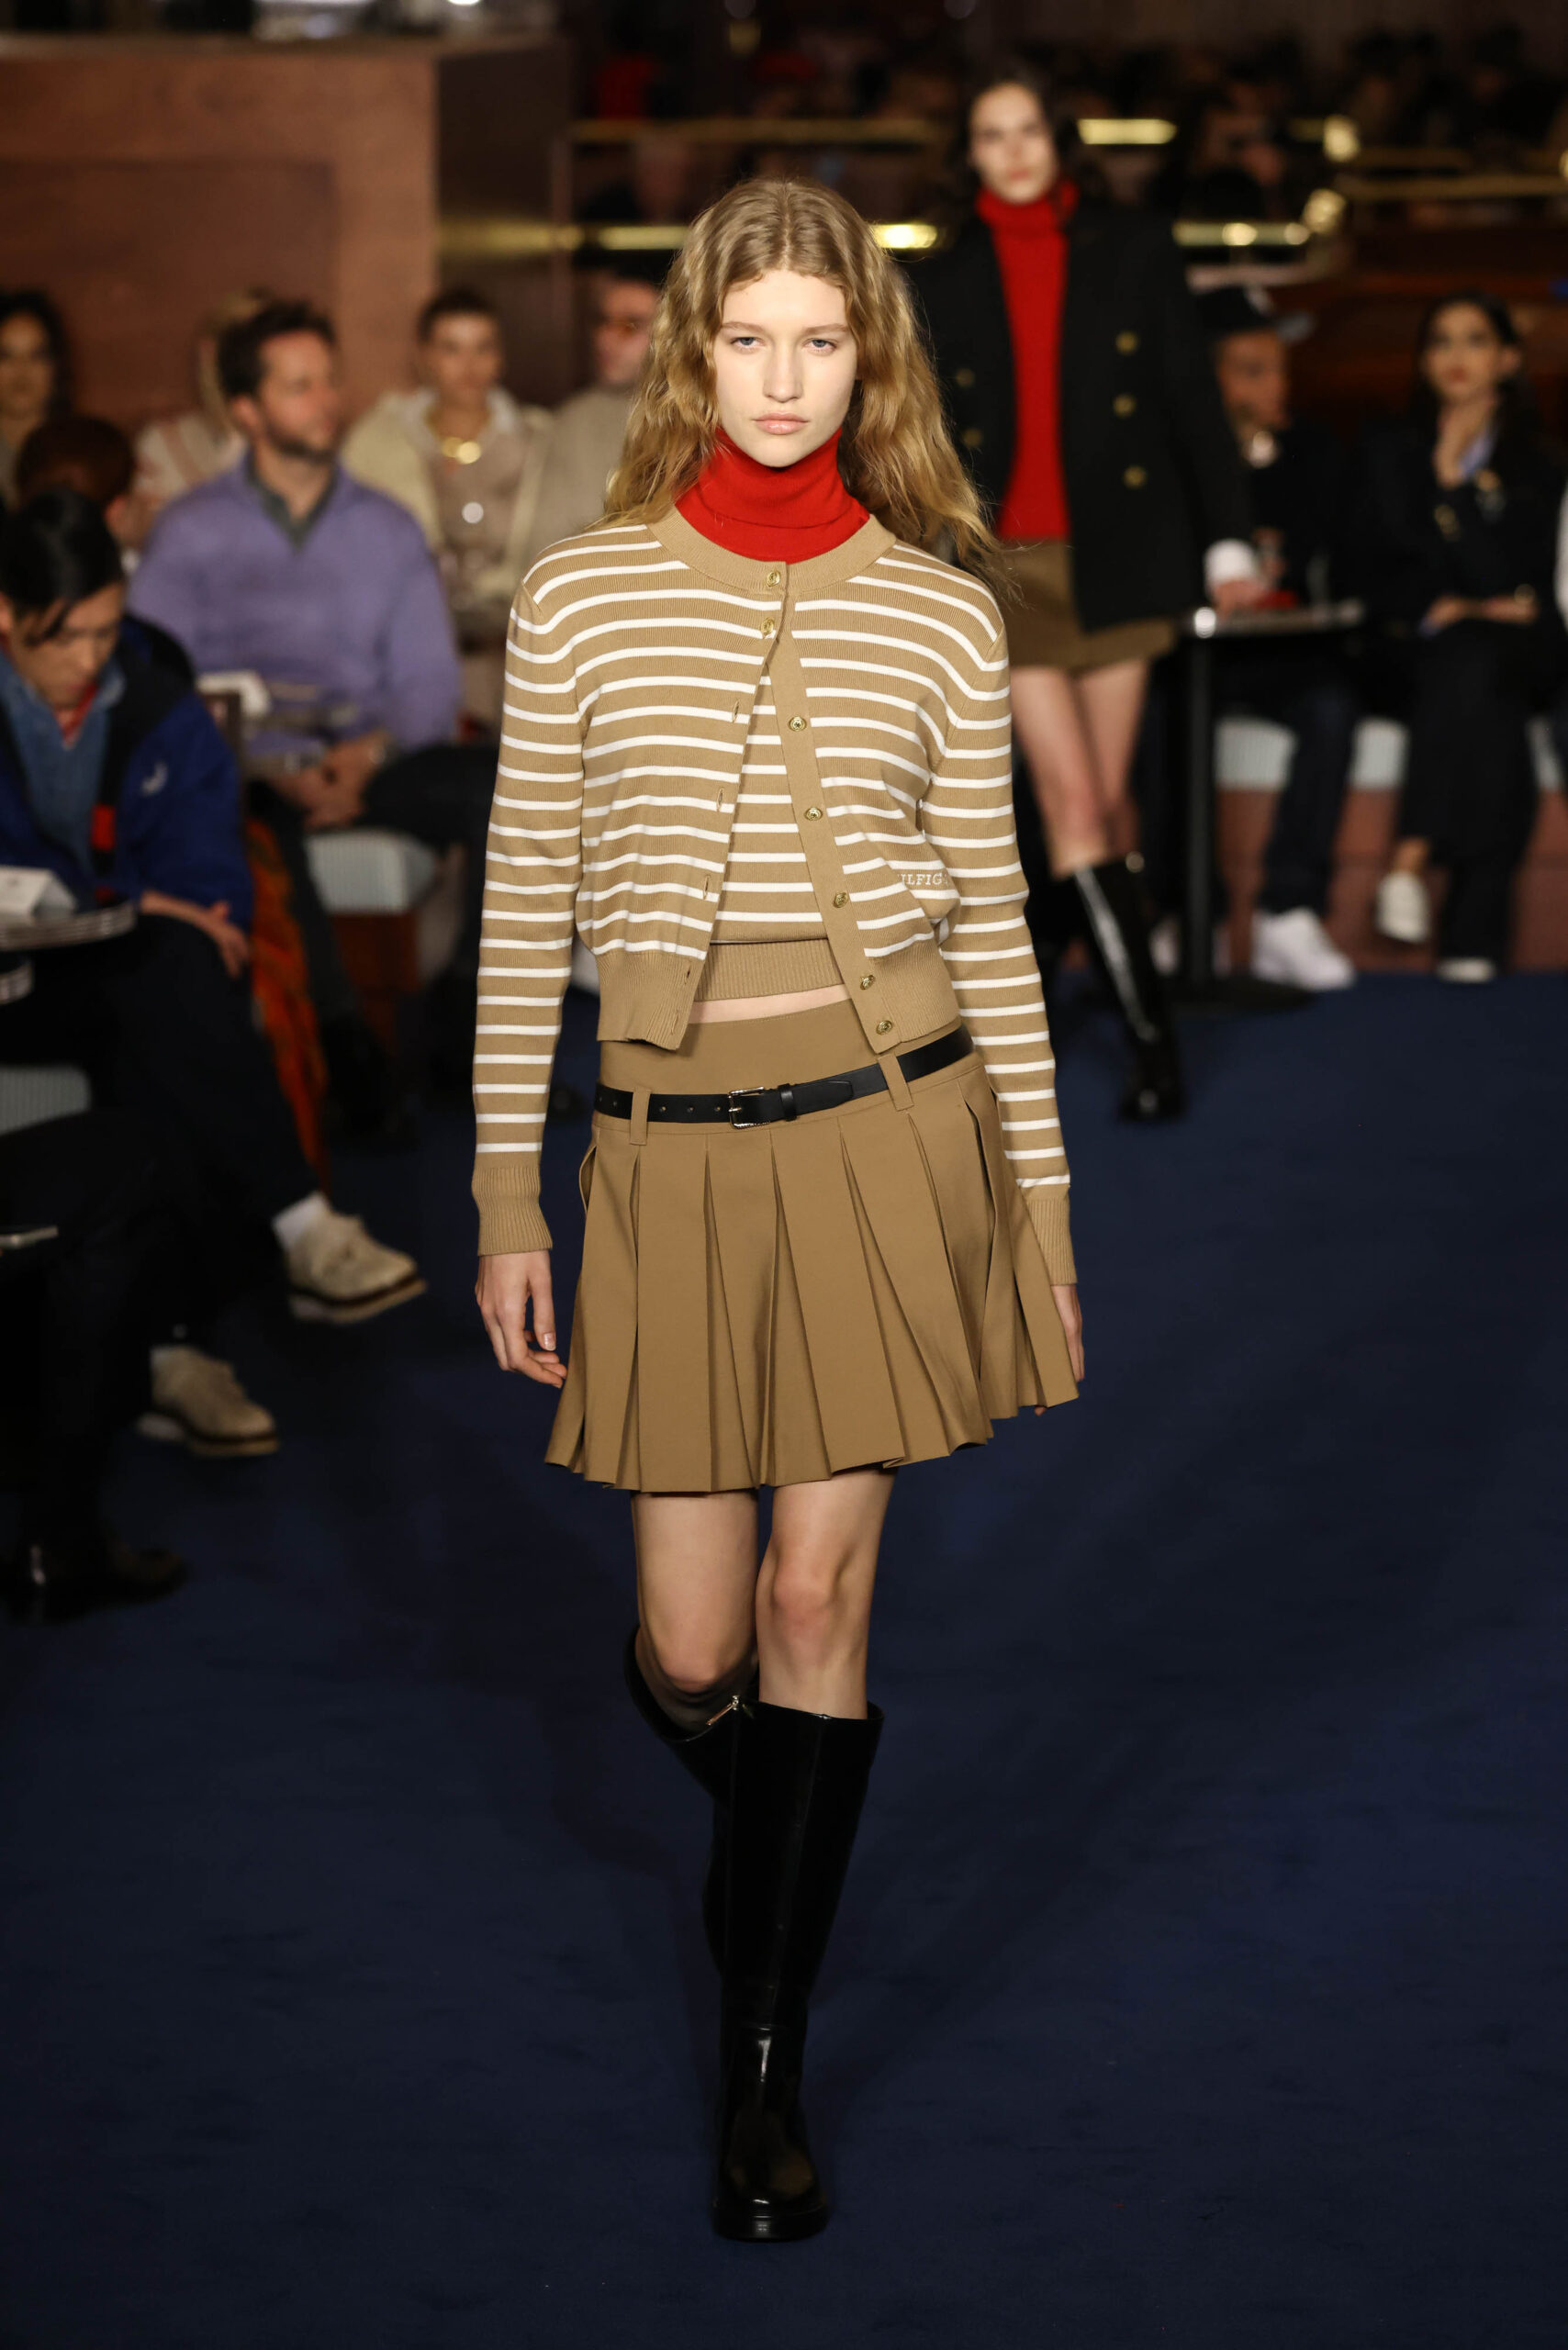 Tommy Hilfiger Returns to NYFW With 'A New York Moment' Show